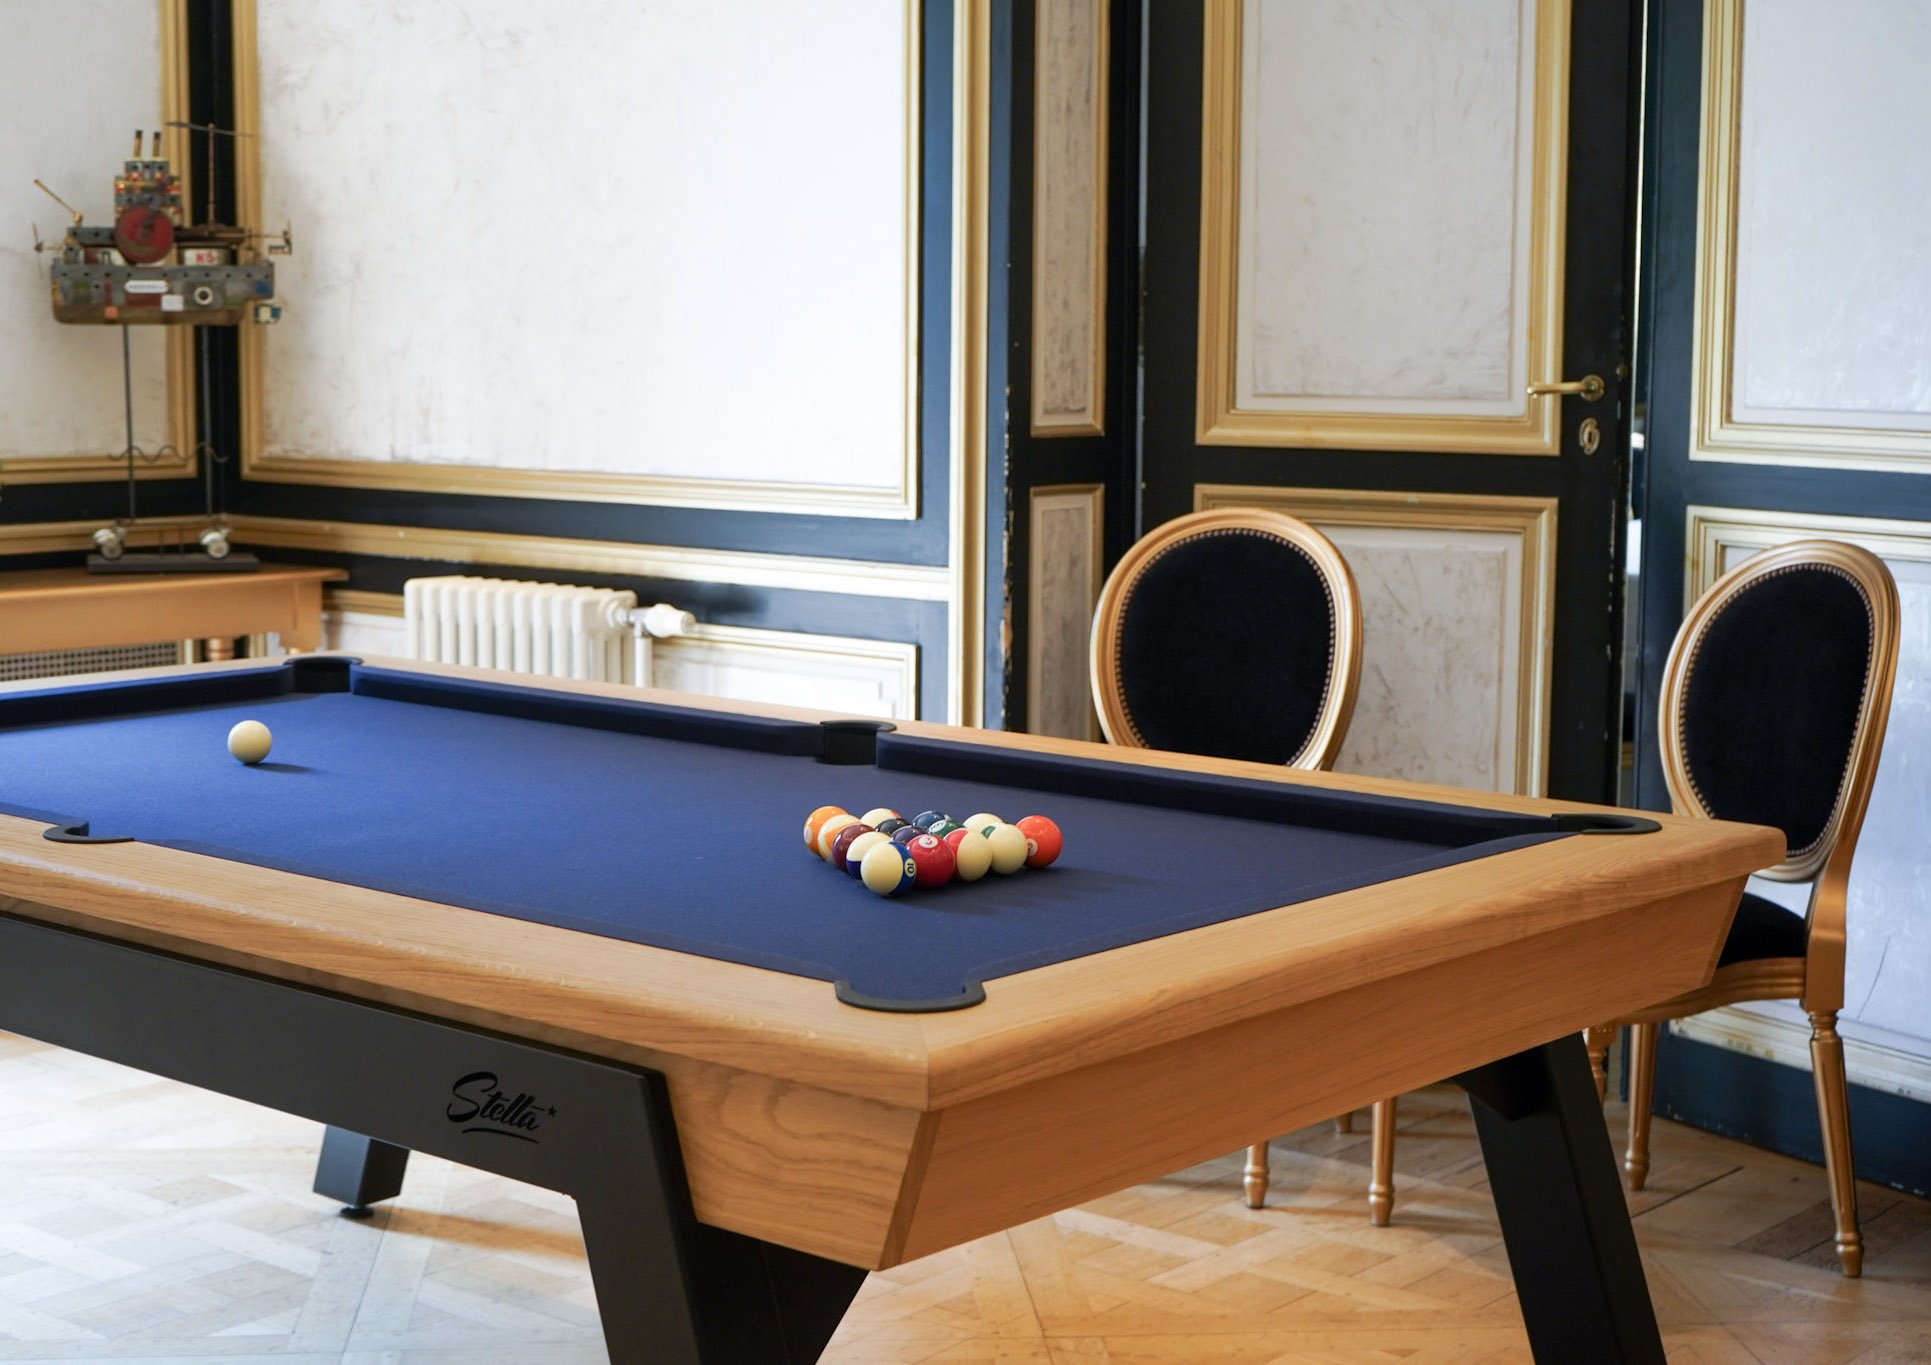 The Scipion pool table